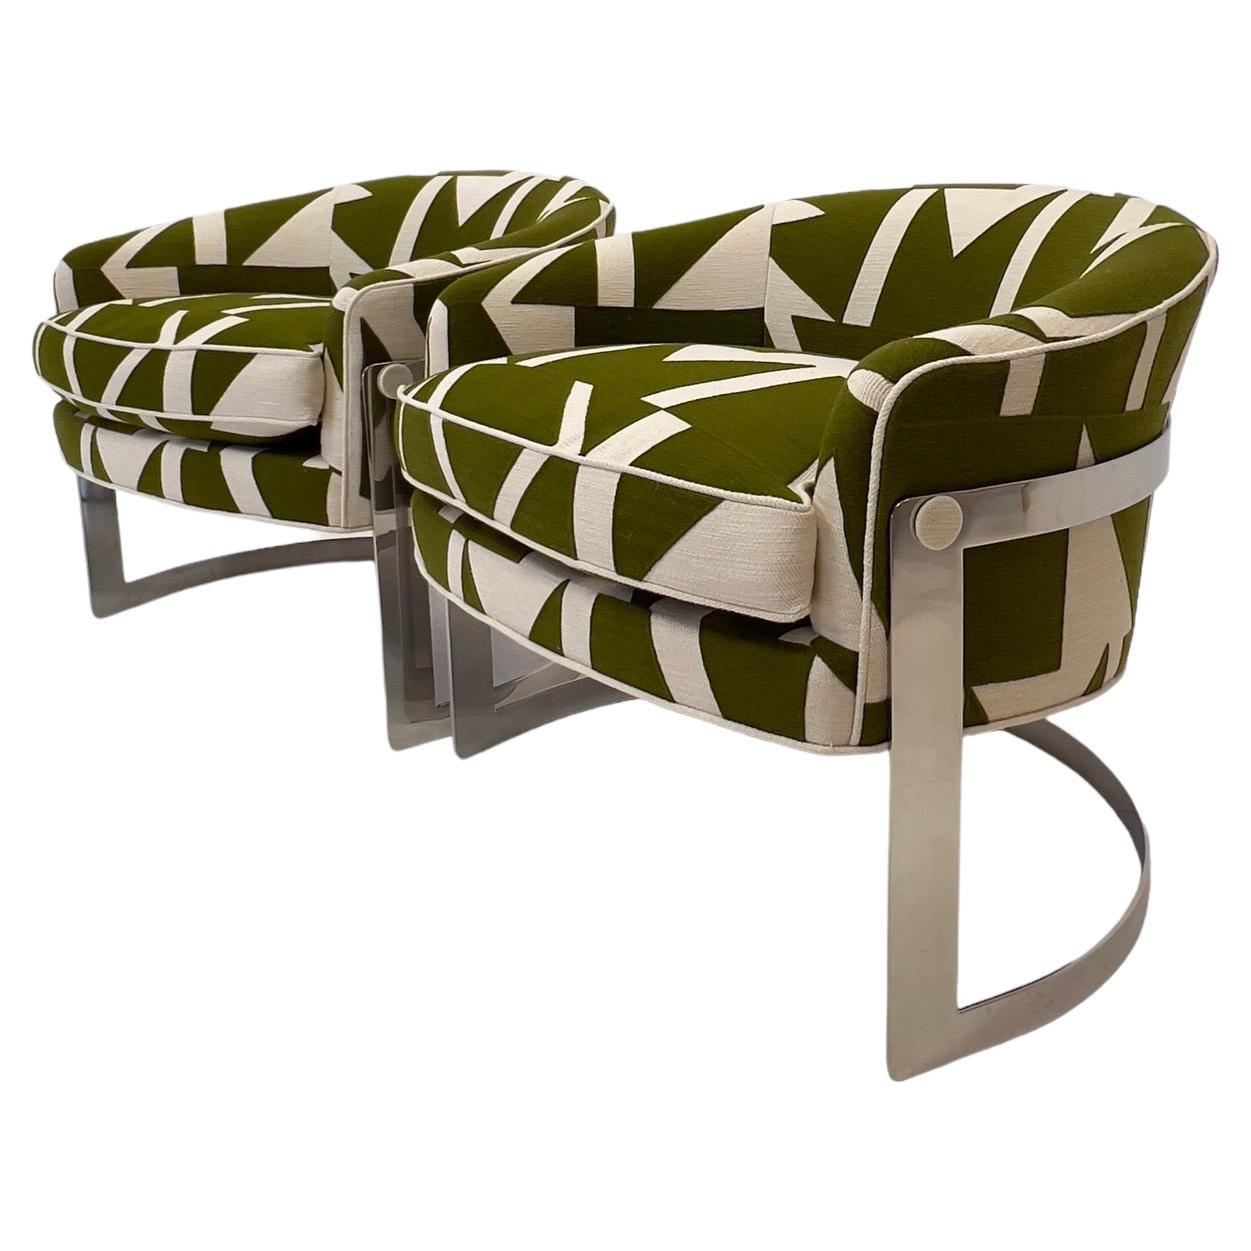 Pair of Flair Chrome Barrel Chairs in Pierre Frey Wokabi Fabric For Sale